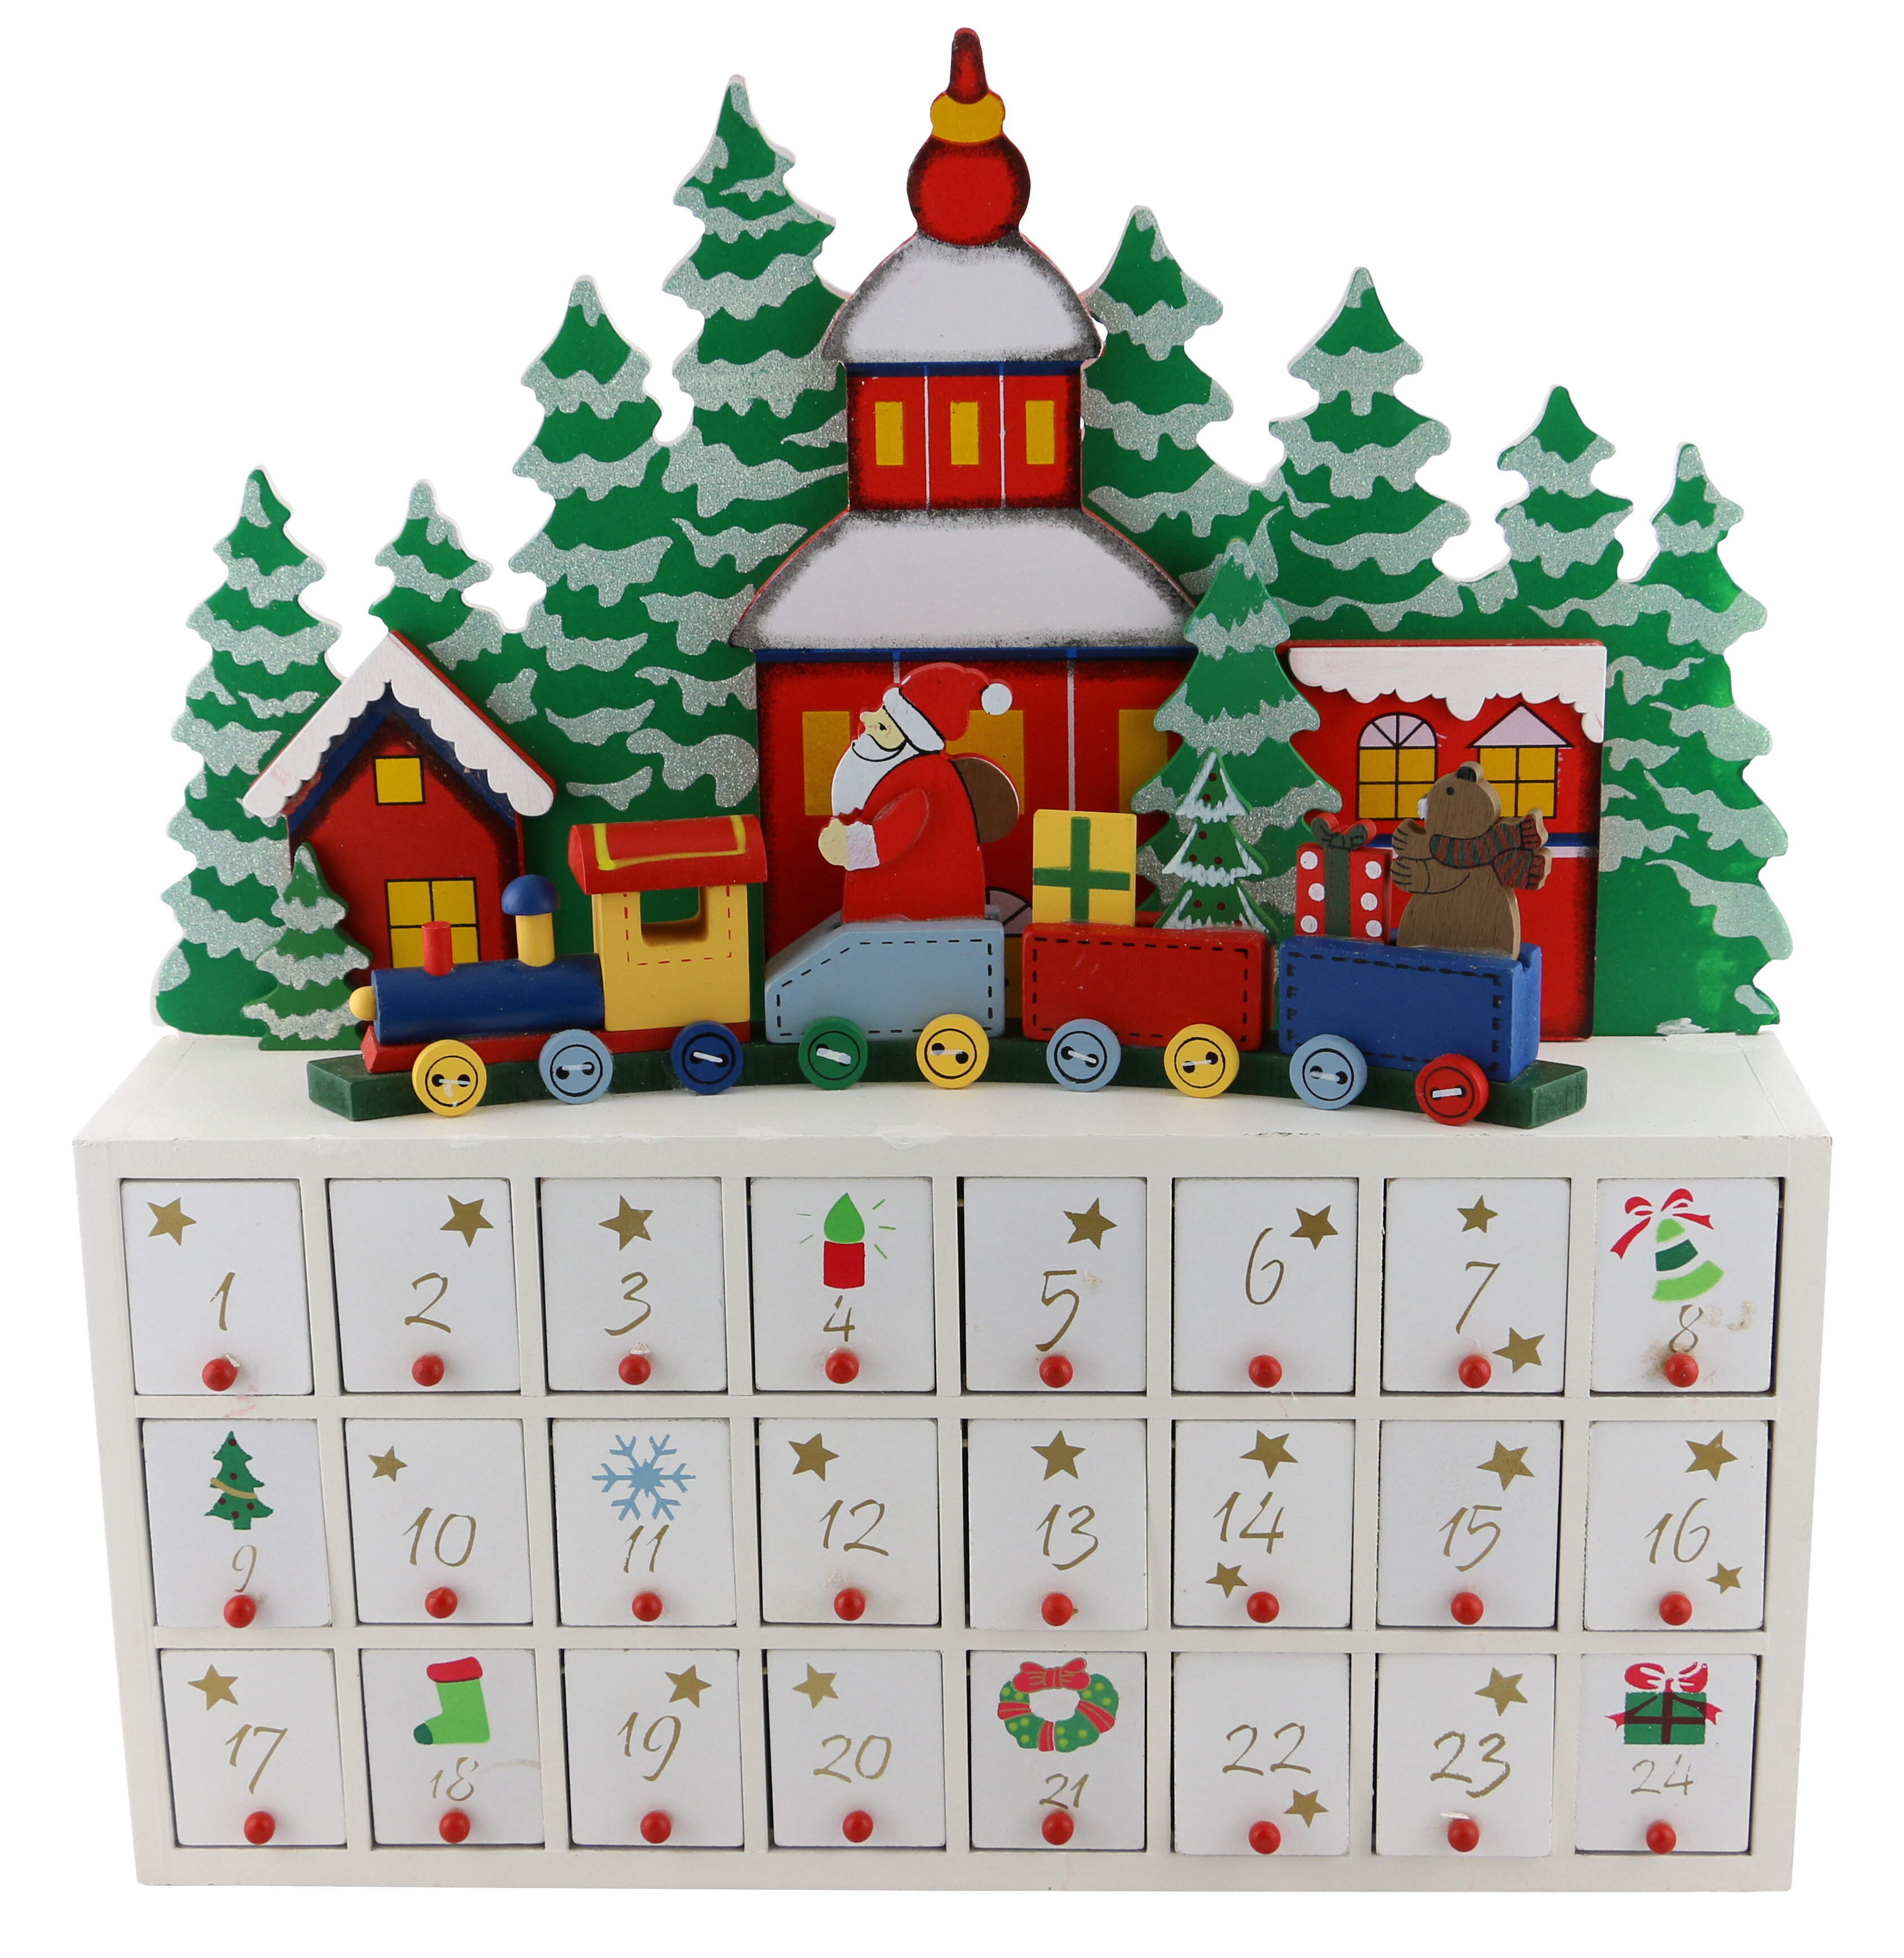 Christmas Decorations Basic Fundamentals Christmas and Advent Wooden Train Calendar with 24 Drawers Advent Calendar for Kids and Adults 18 x 4 x 6